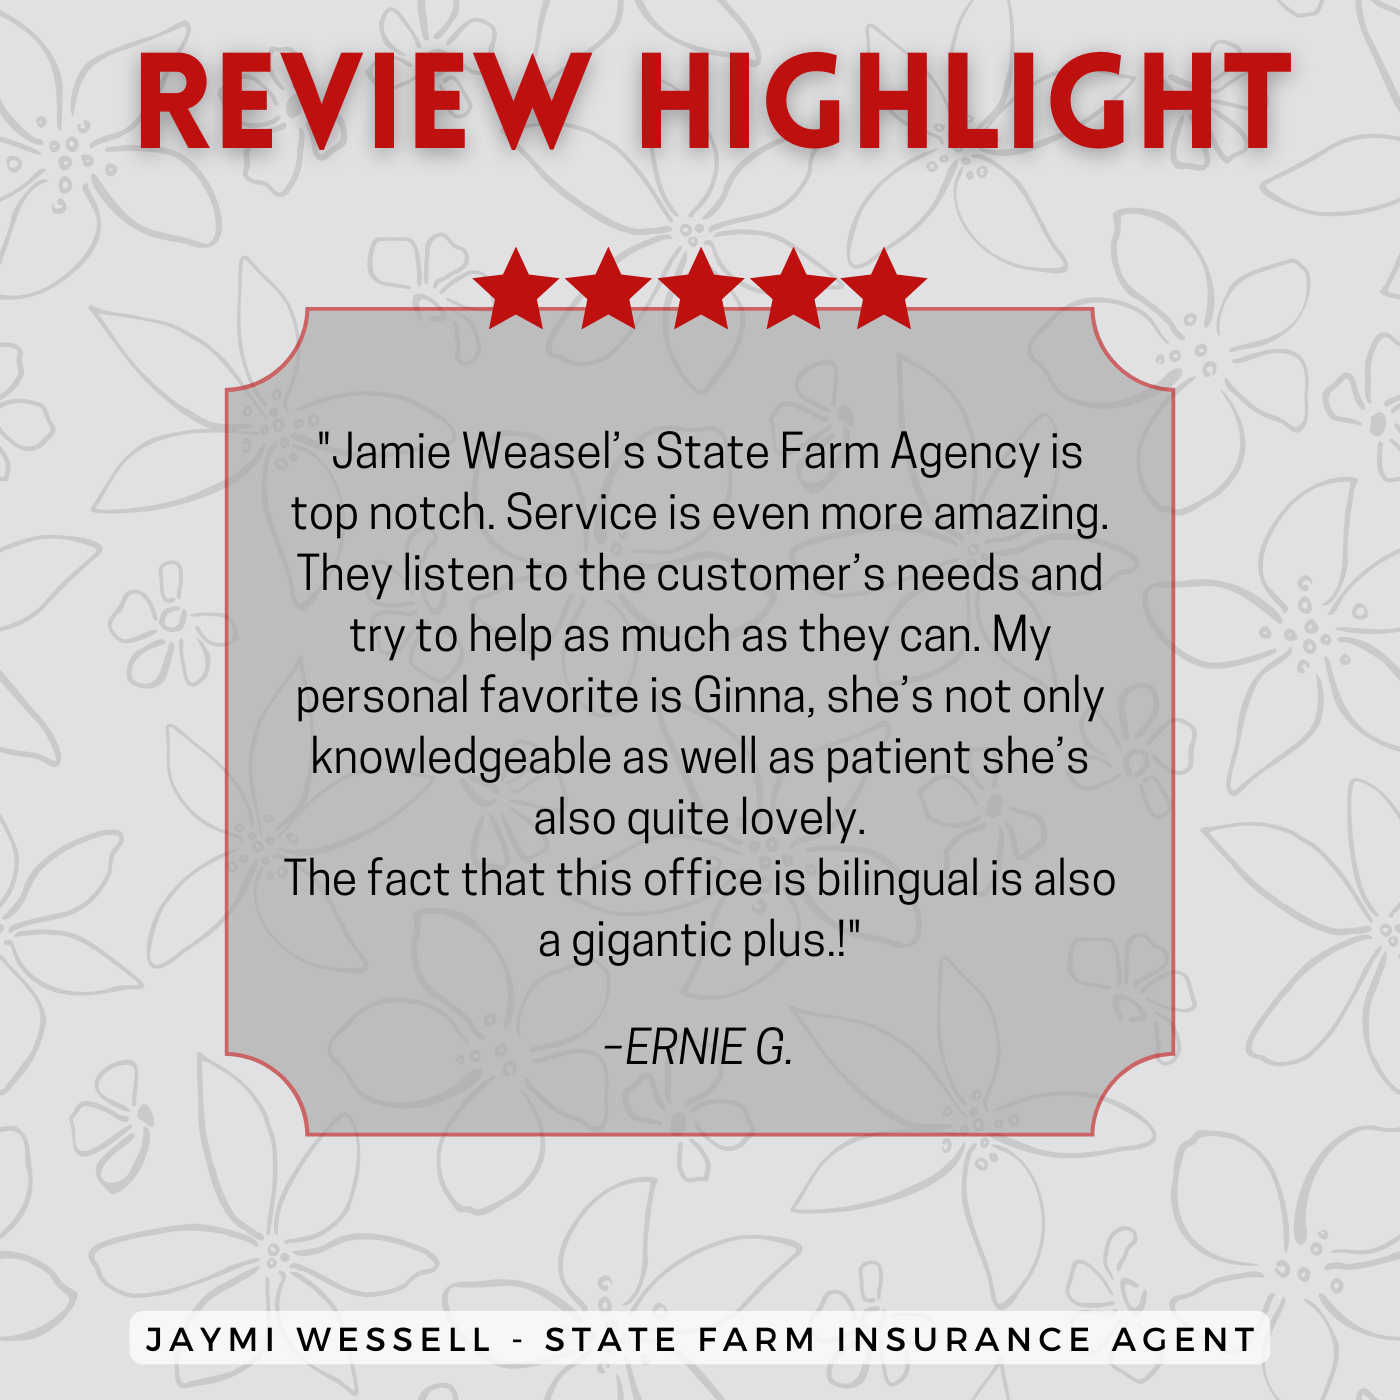 Jaymi Wessell - State Farm Insurance Agent
Review highlight